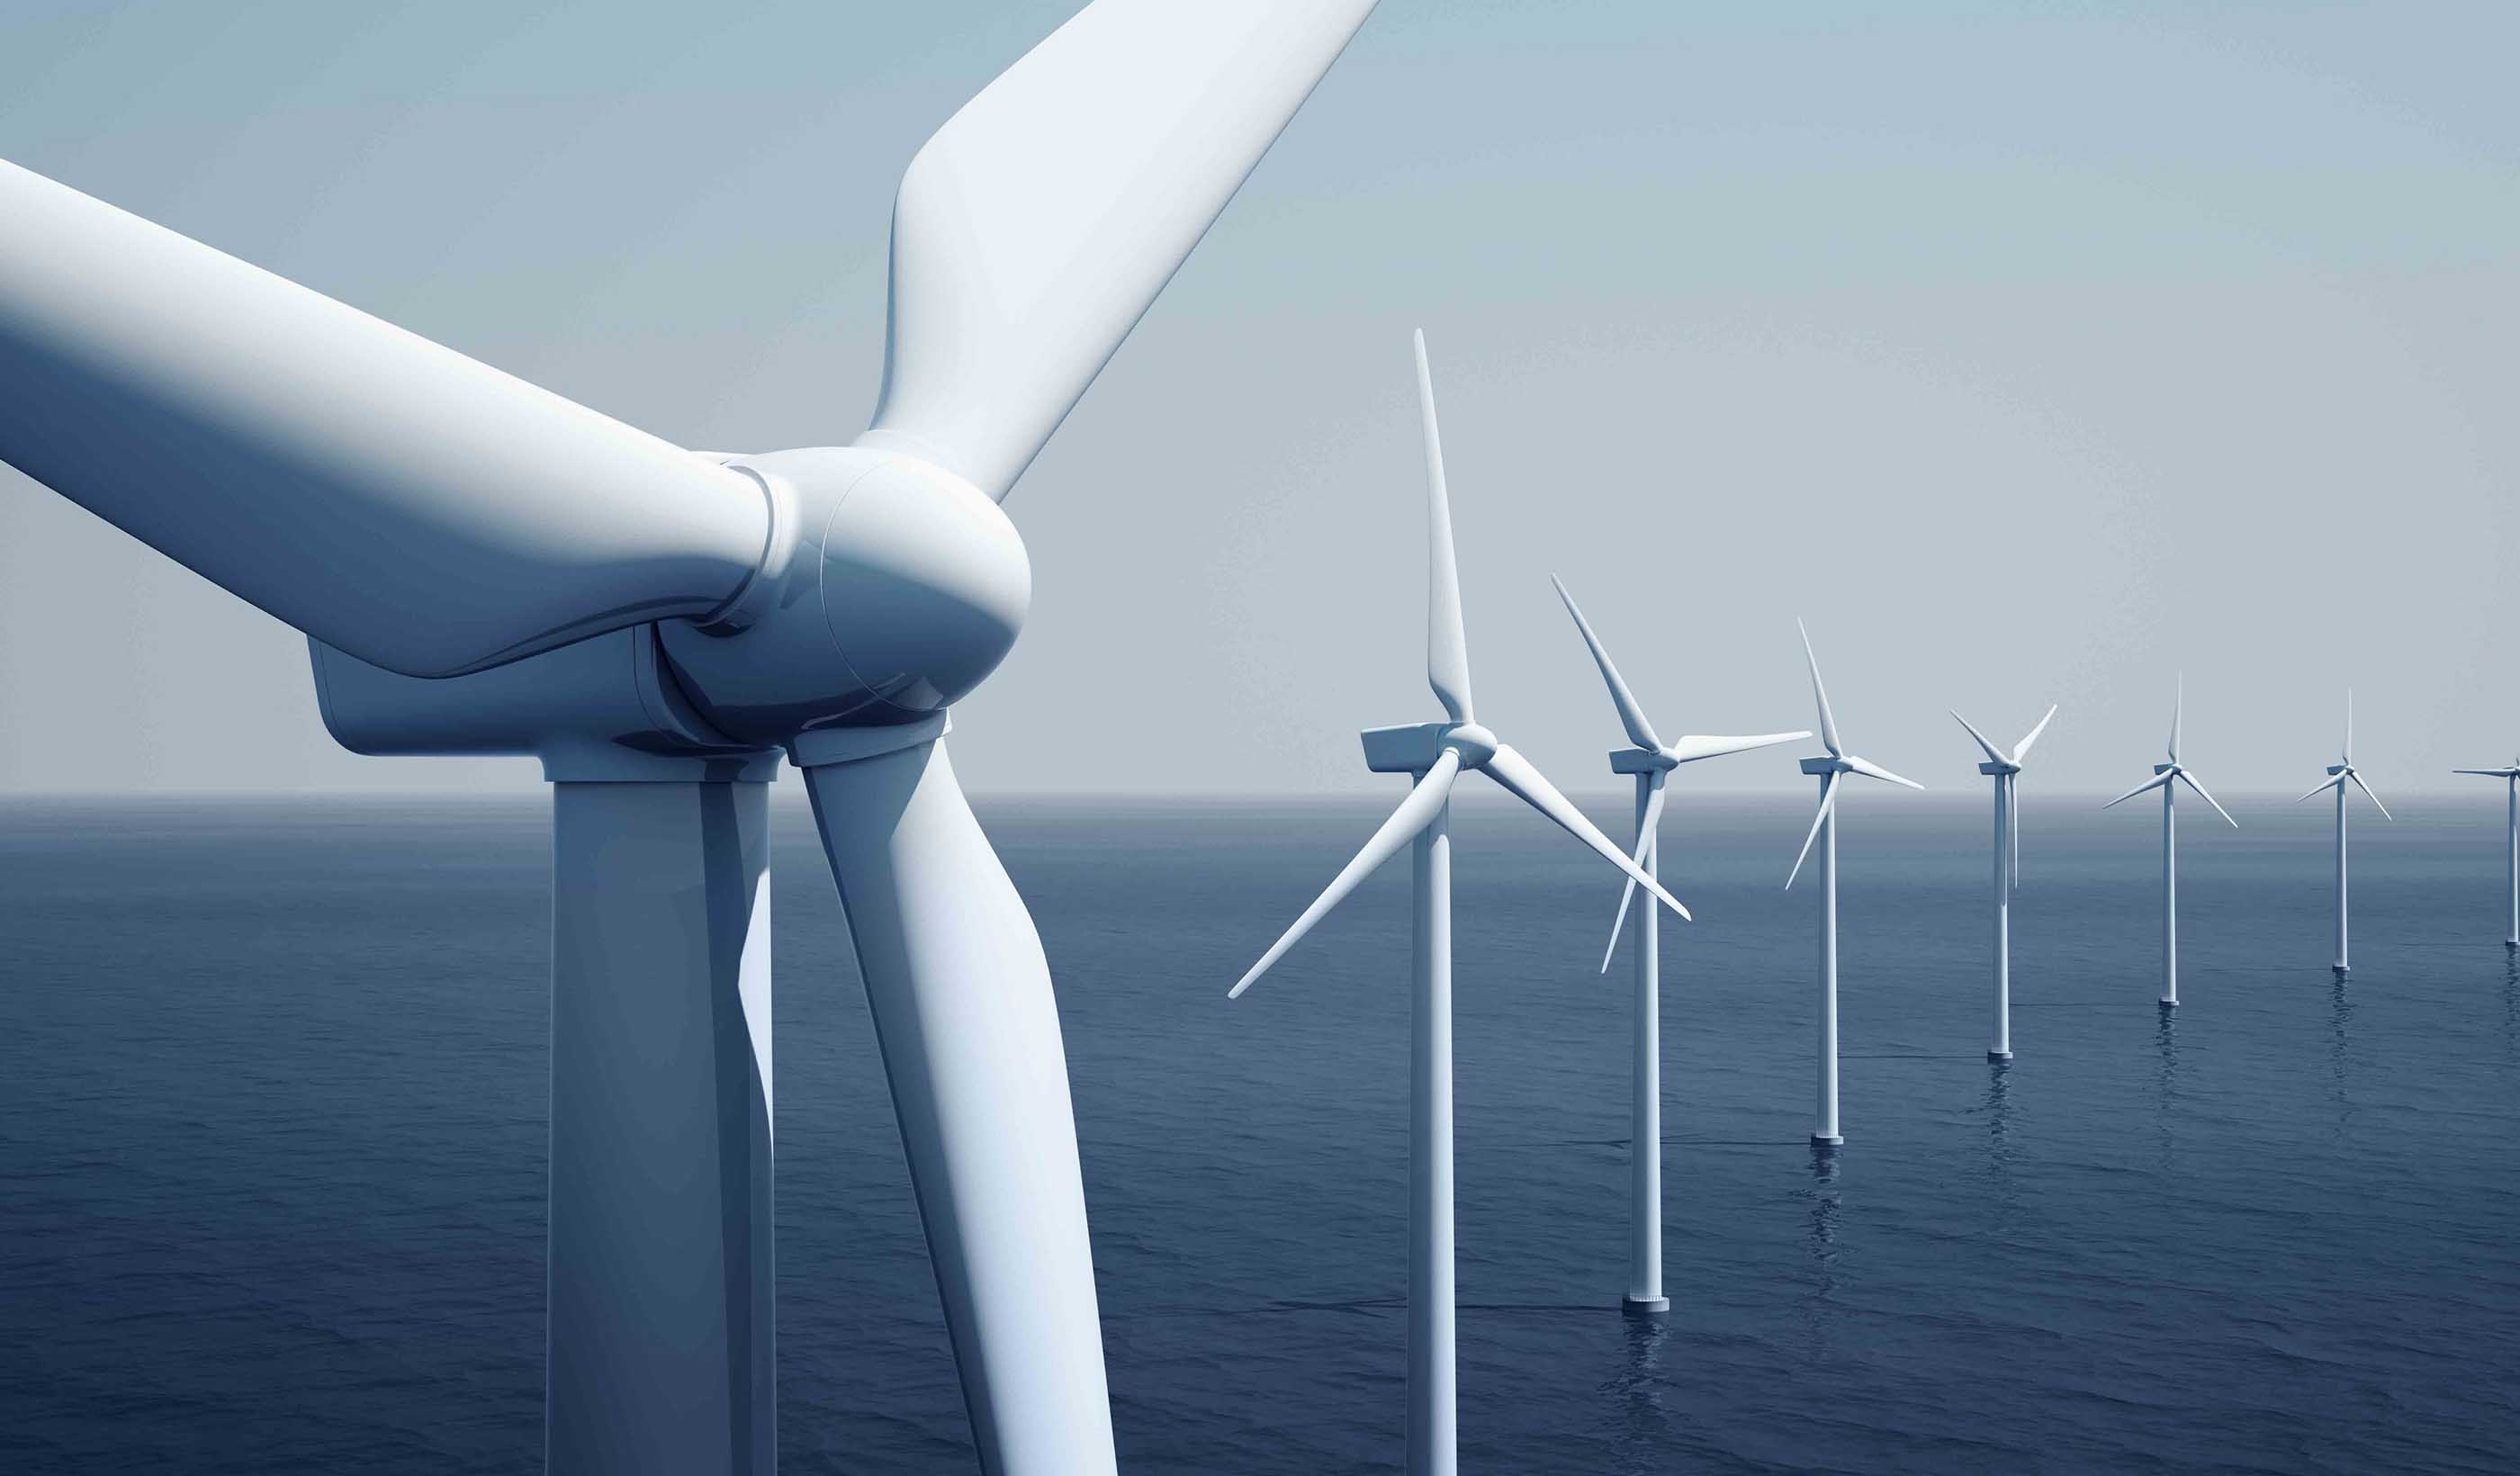 Plugging offshore wind power into our energy grid